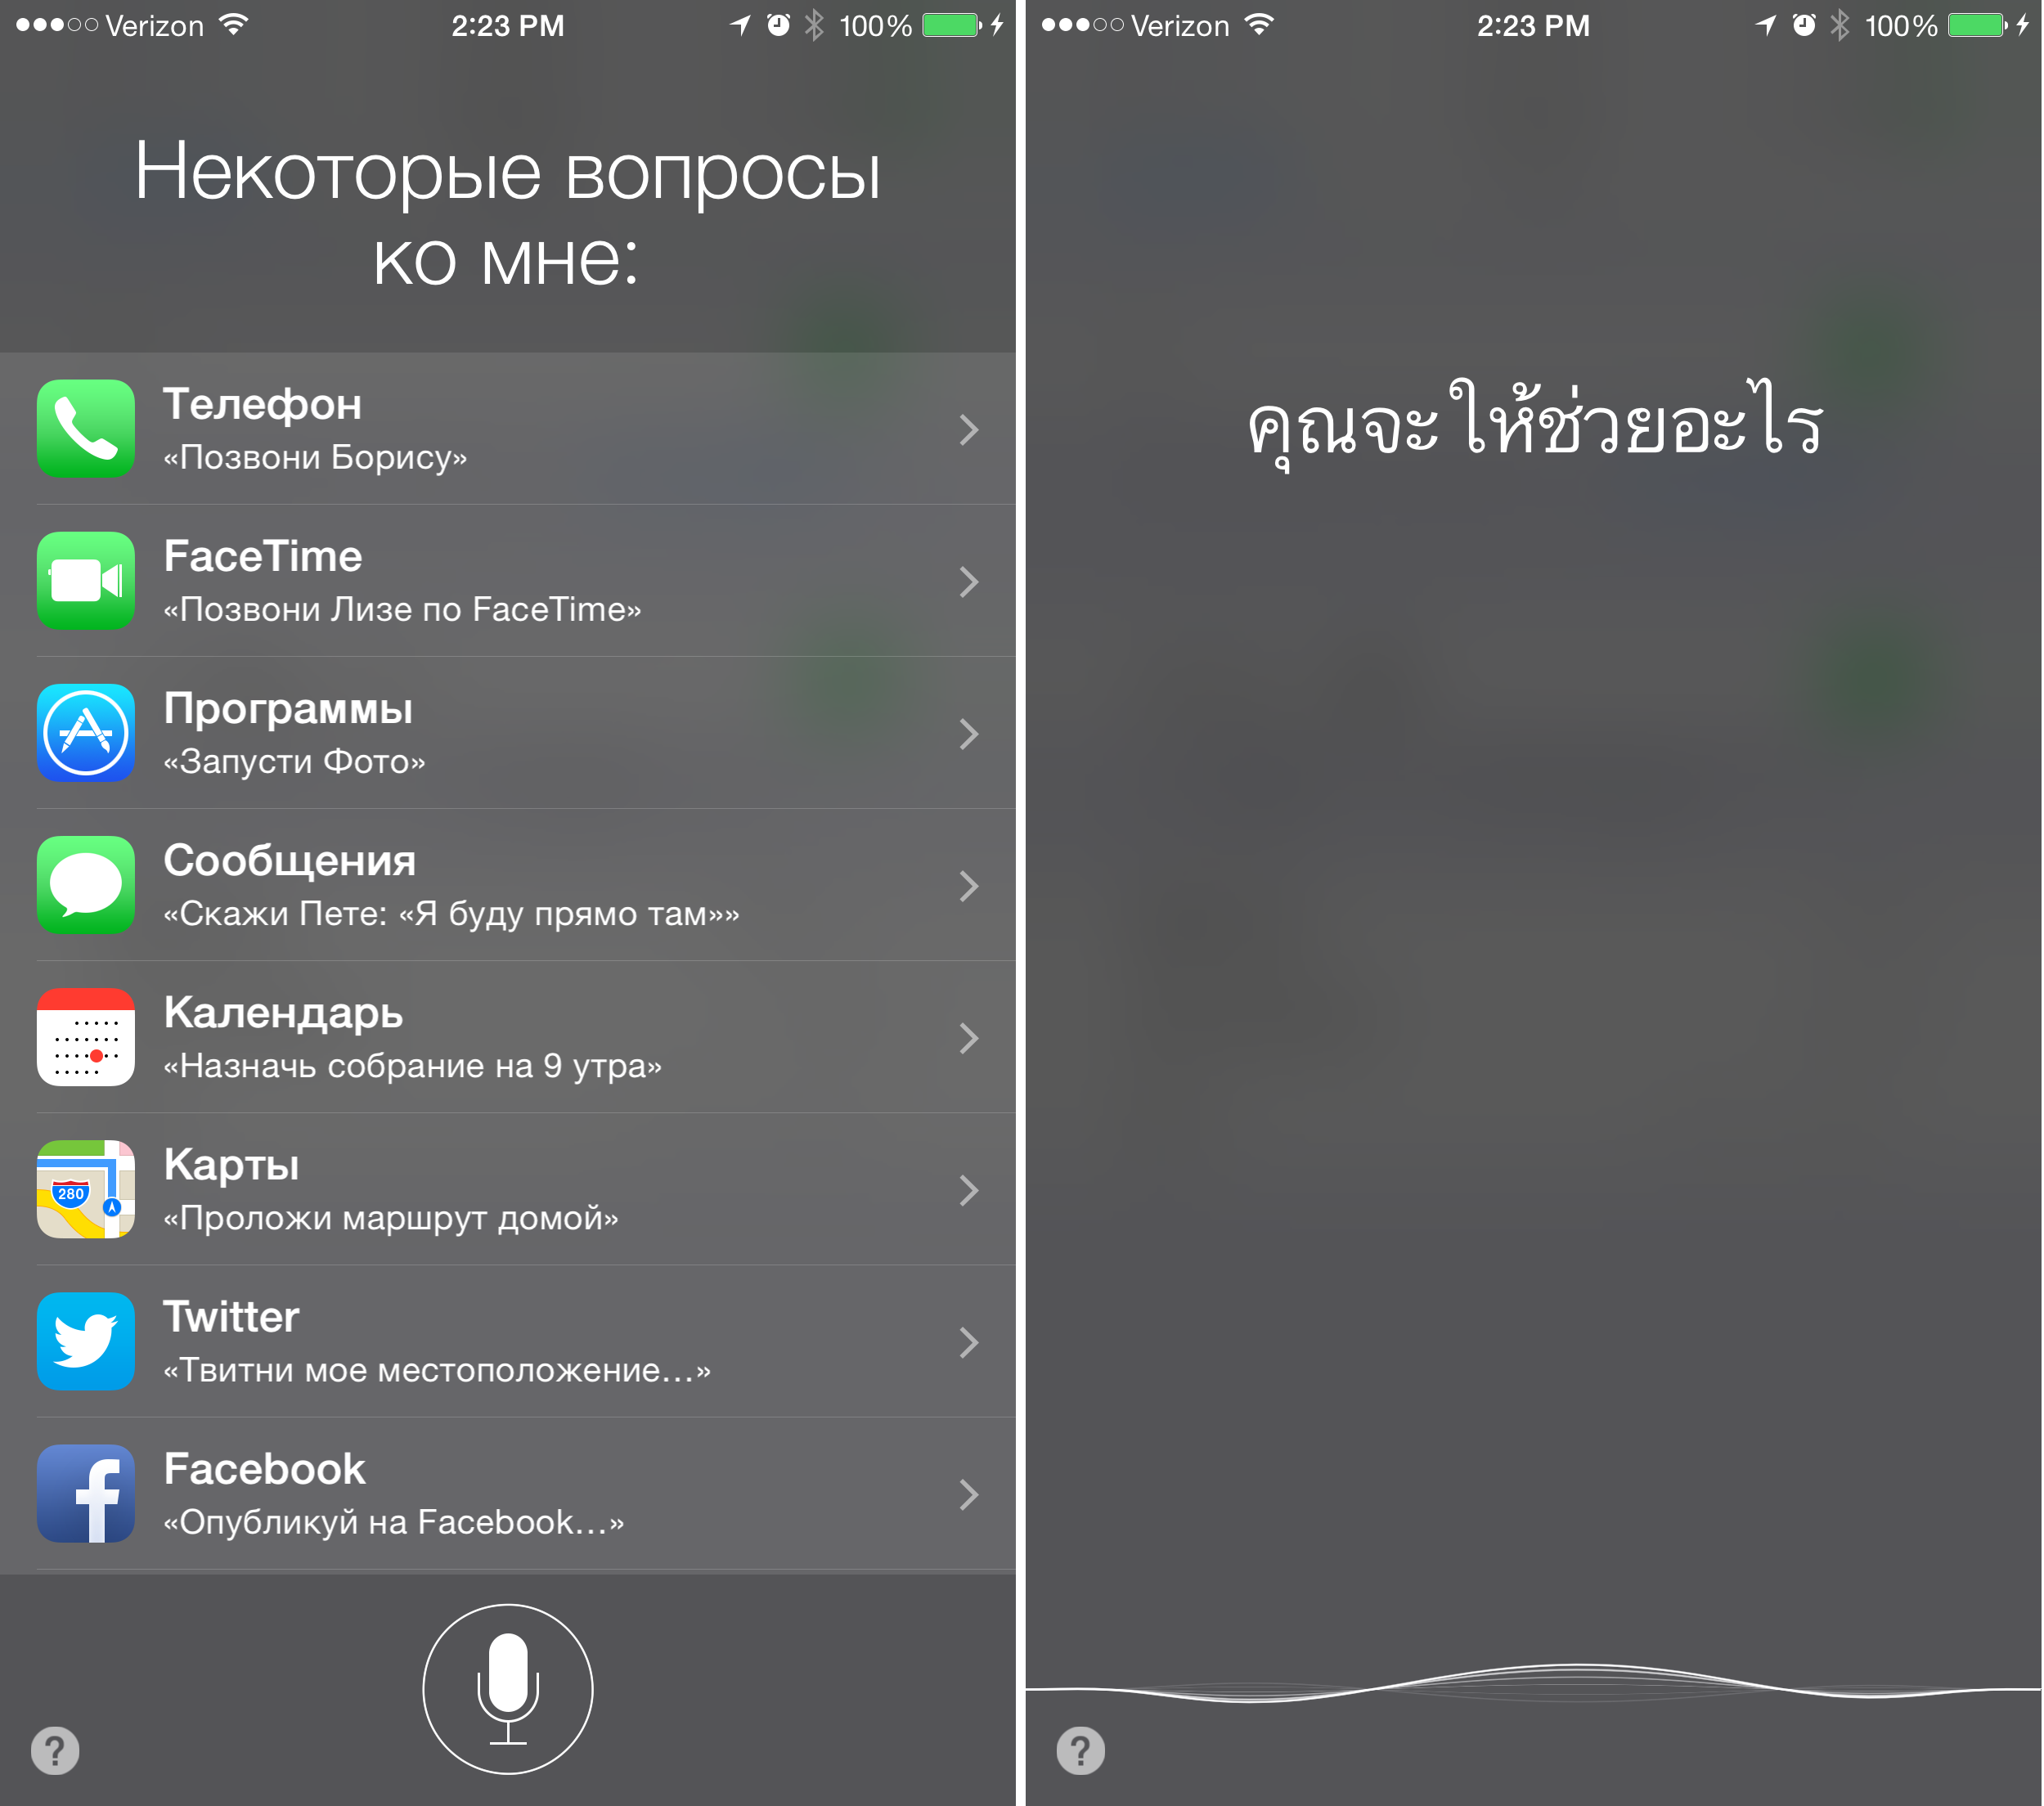 Siri learns eight new languages in iOS 8.3 beta 2